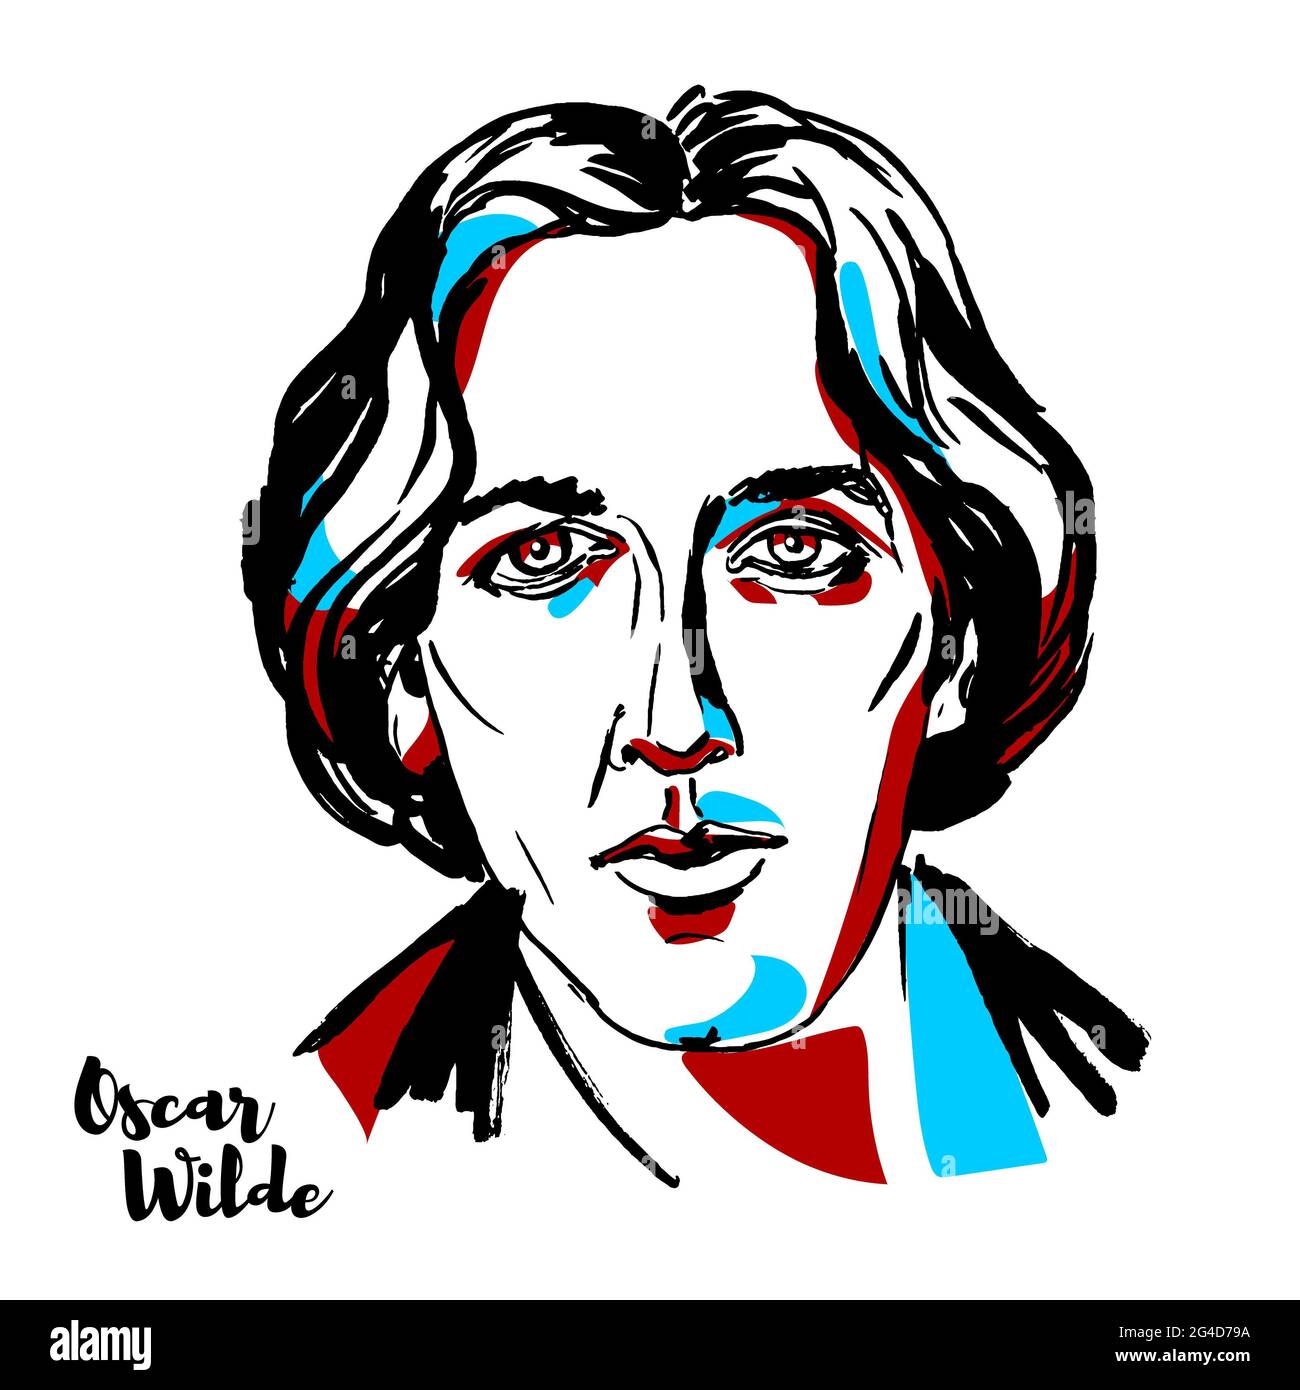 MOSCOW, RUSSIA - AUGUST 21, 2018: Oscar Wilde engraved vector portrait with ink contours. Irish poet and playwright. Stock Photo